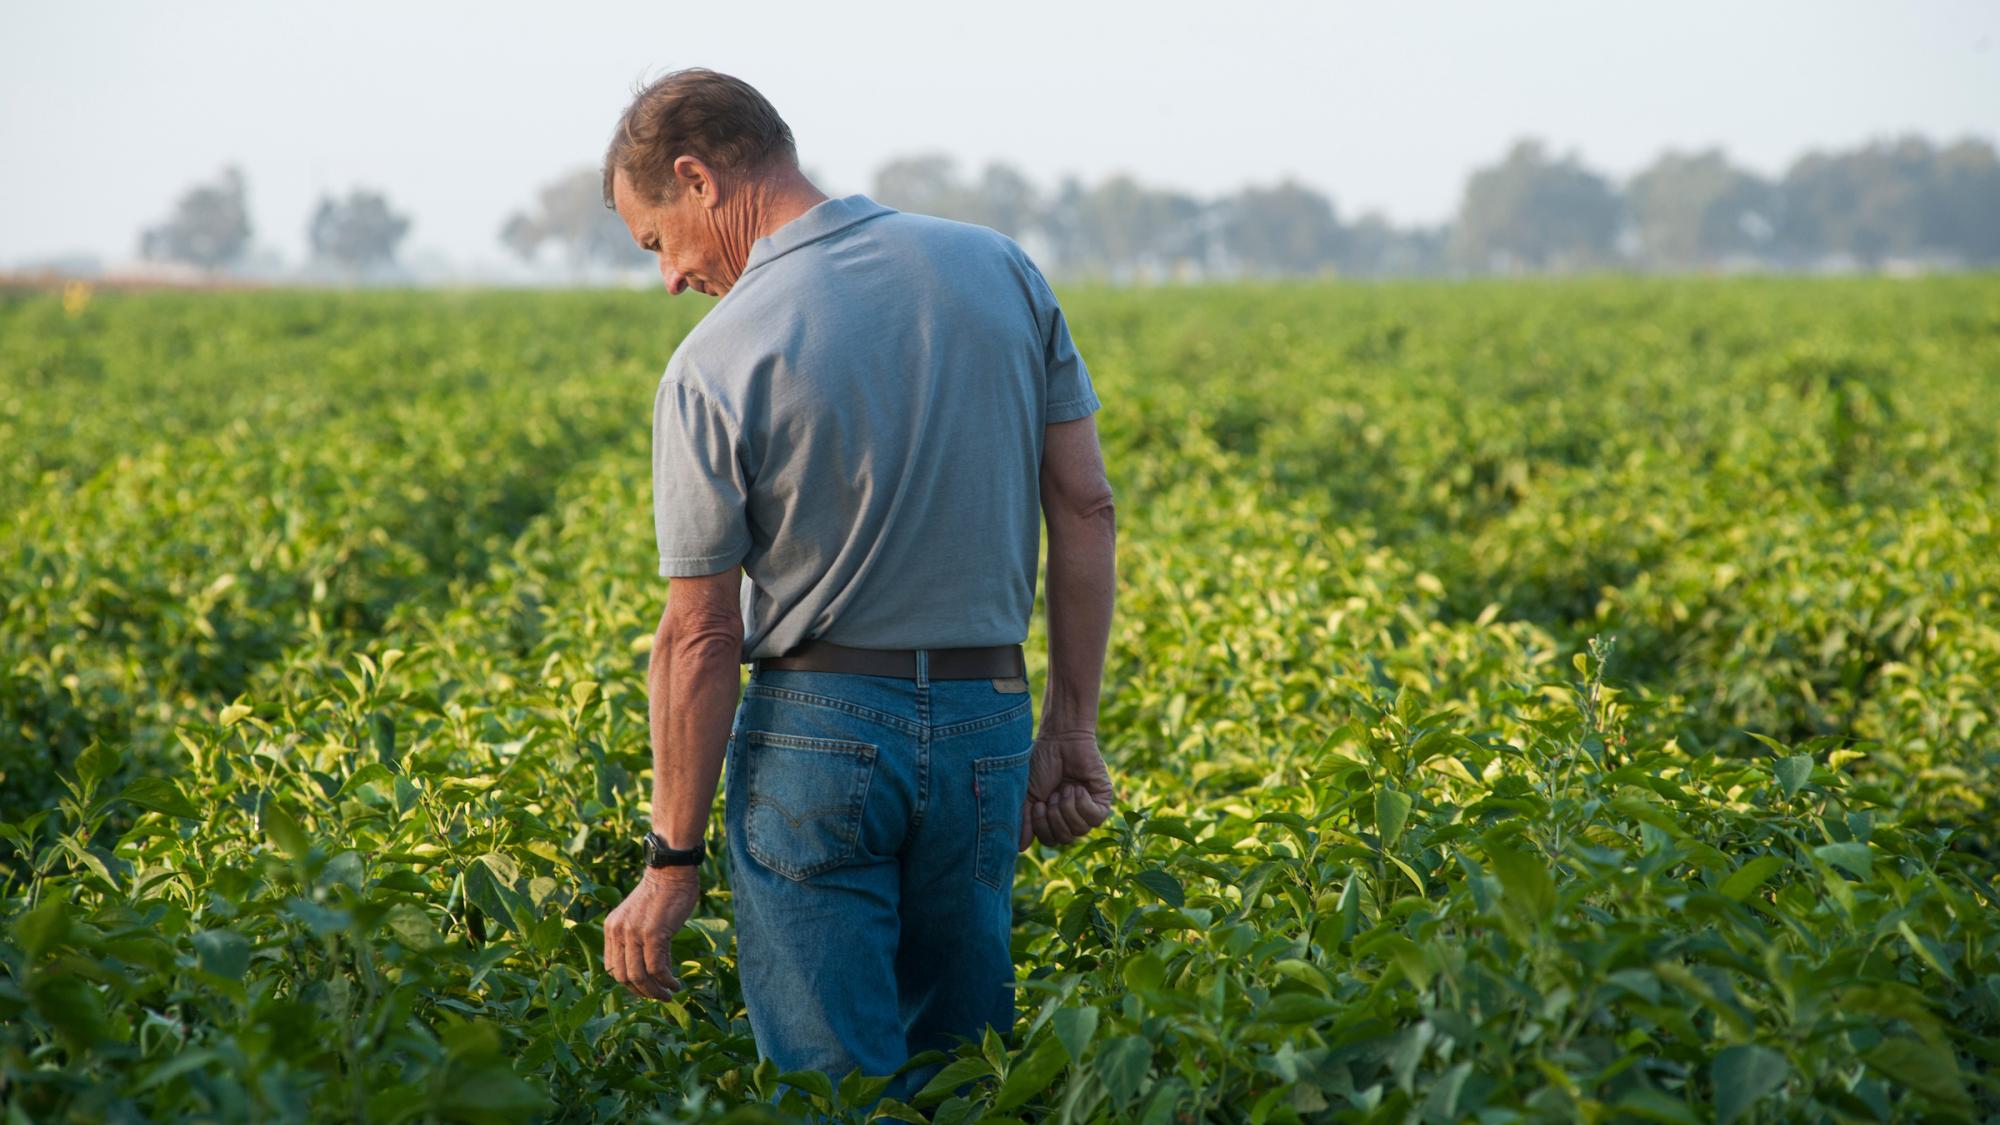 A farmer walks out into his fields and examines his crop.